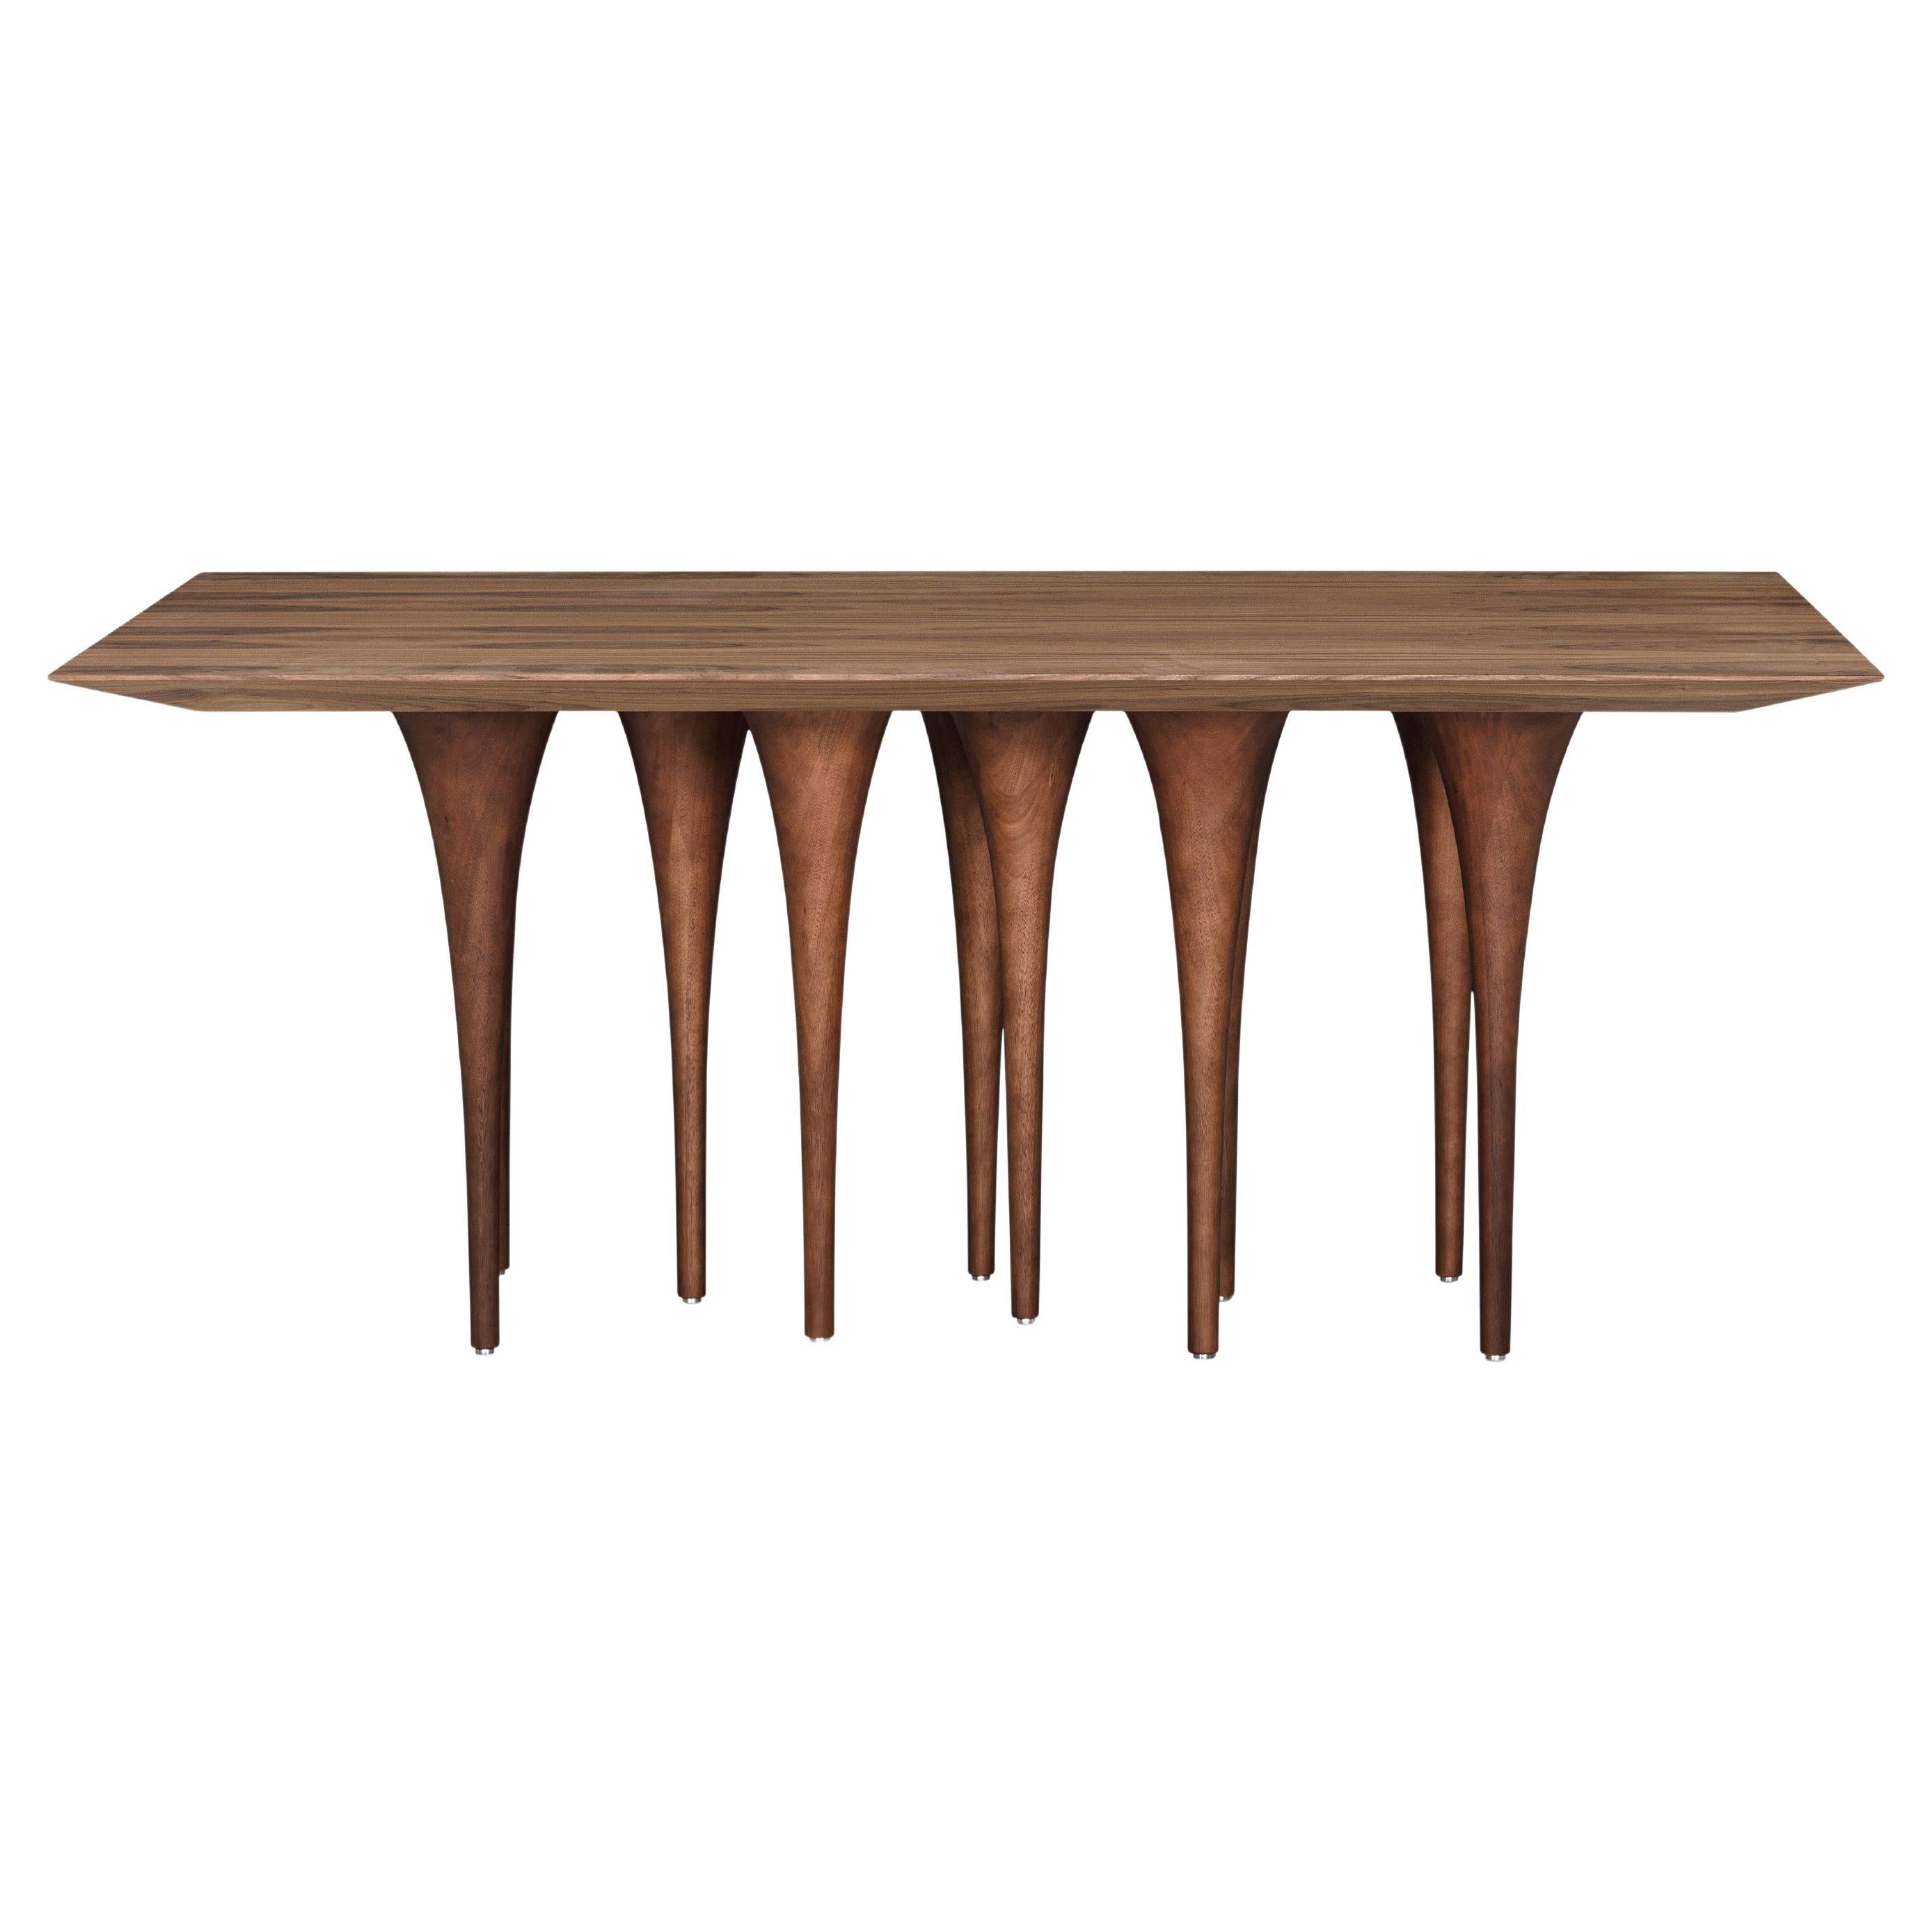 Pin Dining Table with a Walnut Wood Veneered Table Top and 10 Legs 71'' For Sale